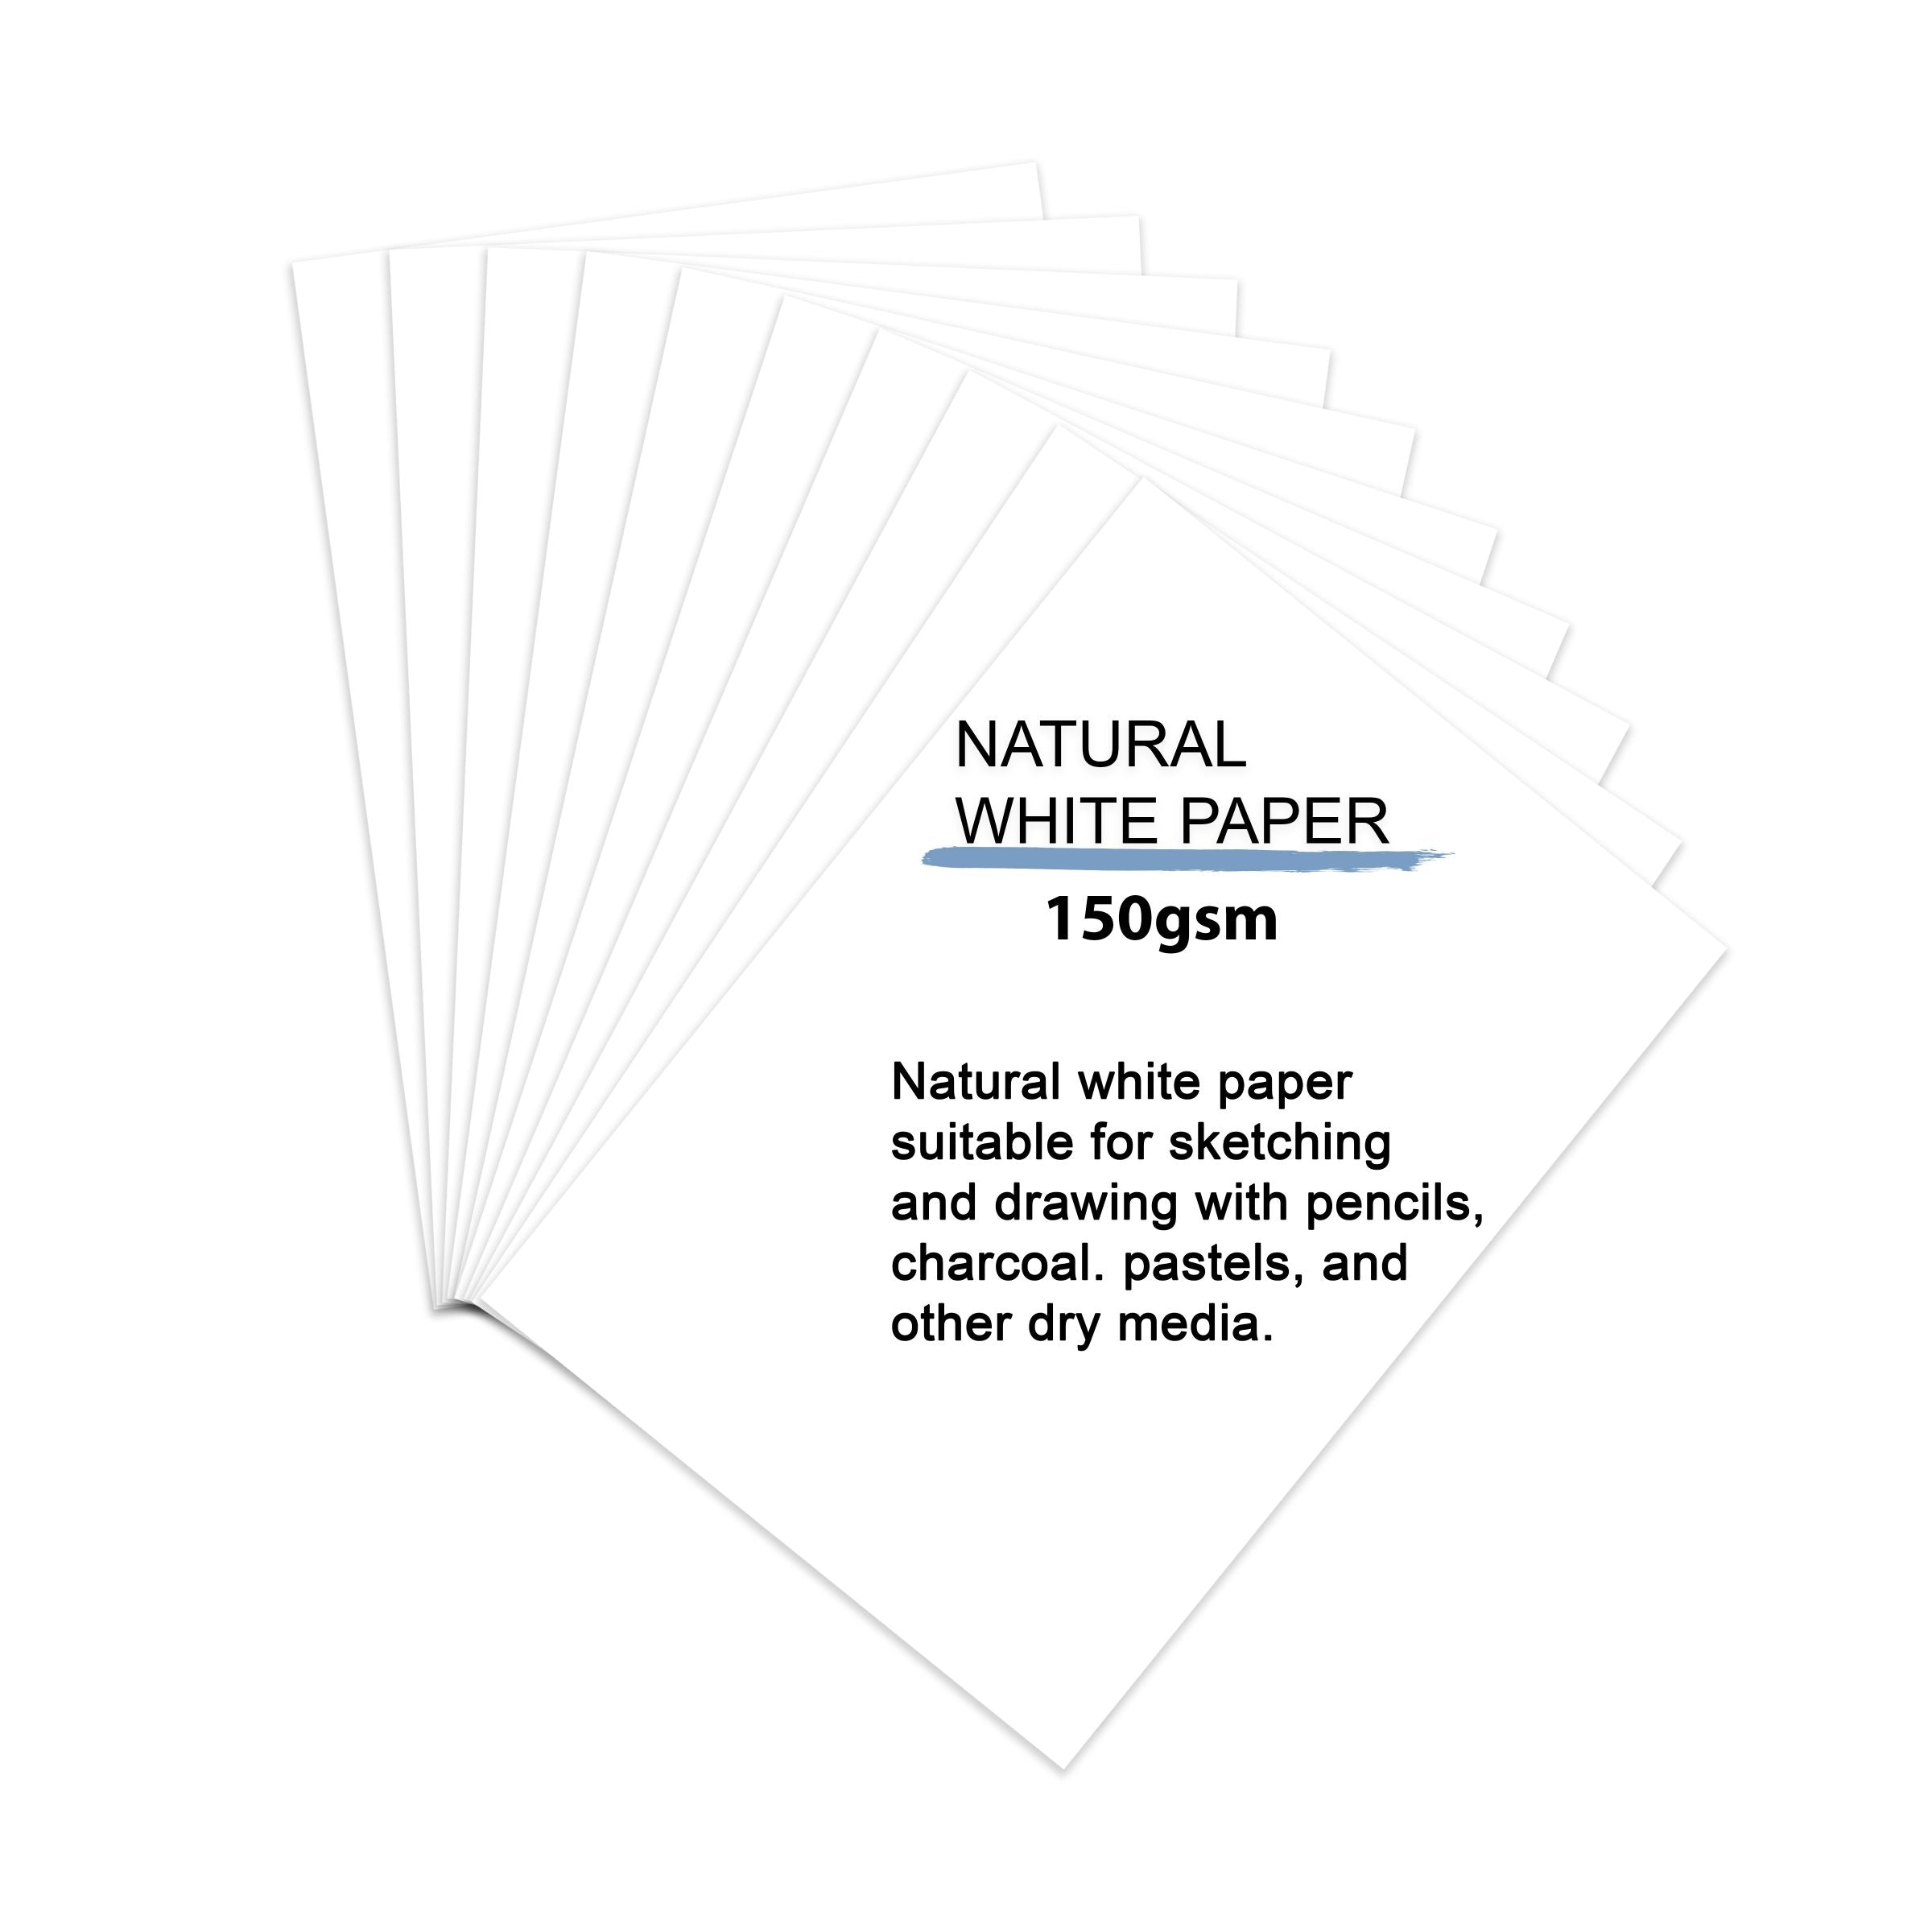 Brusto Drawing Paper 200 GSM A3 Jumbo Pack (Pack of 40+10 Free Sheets)